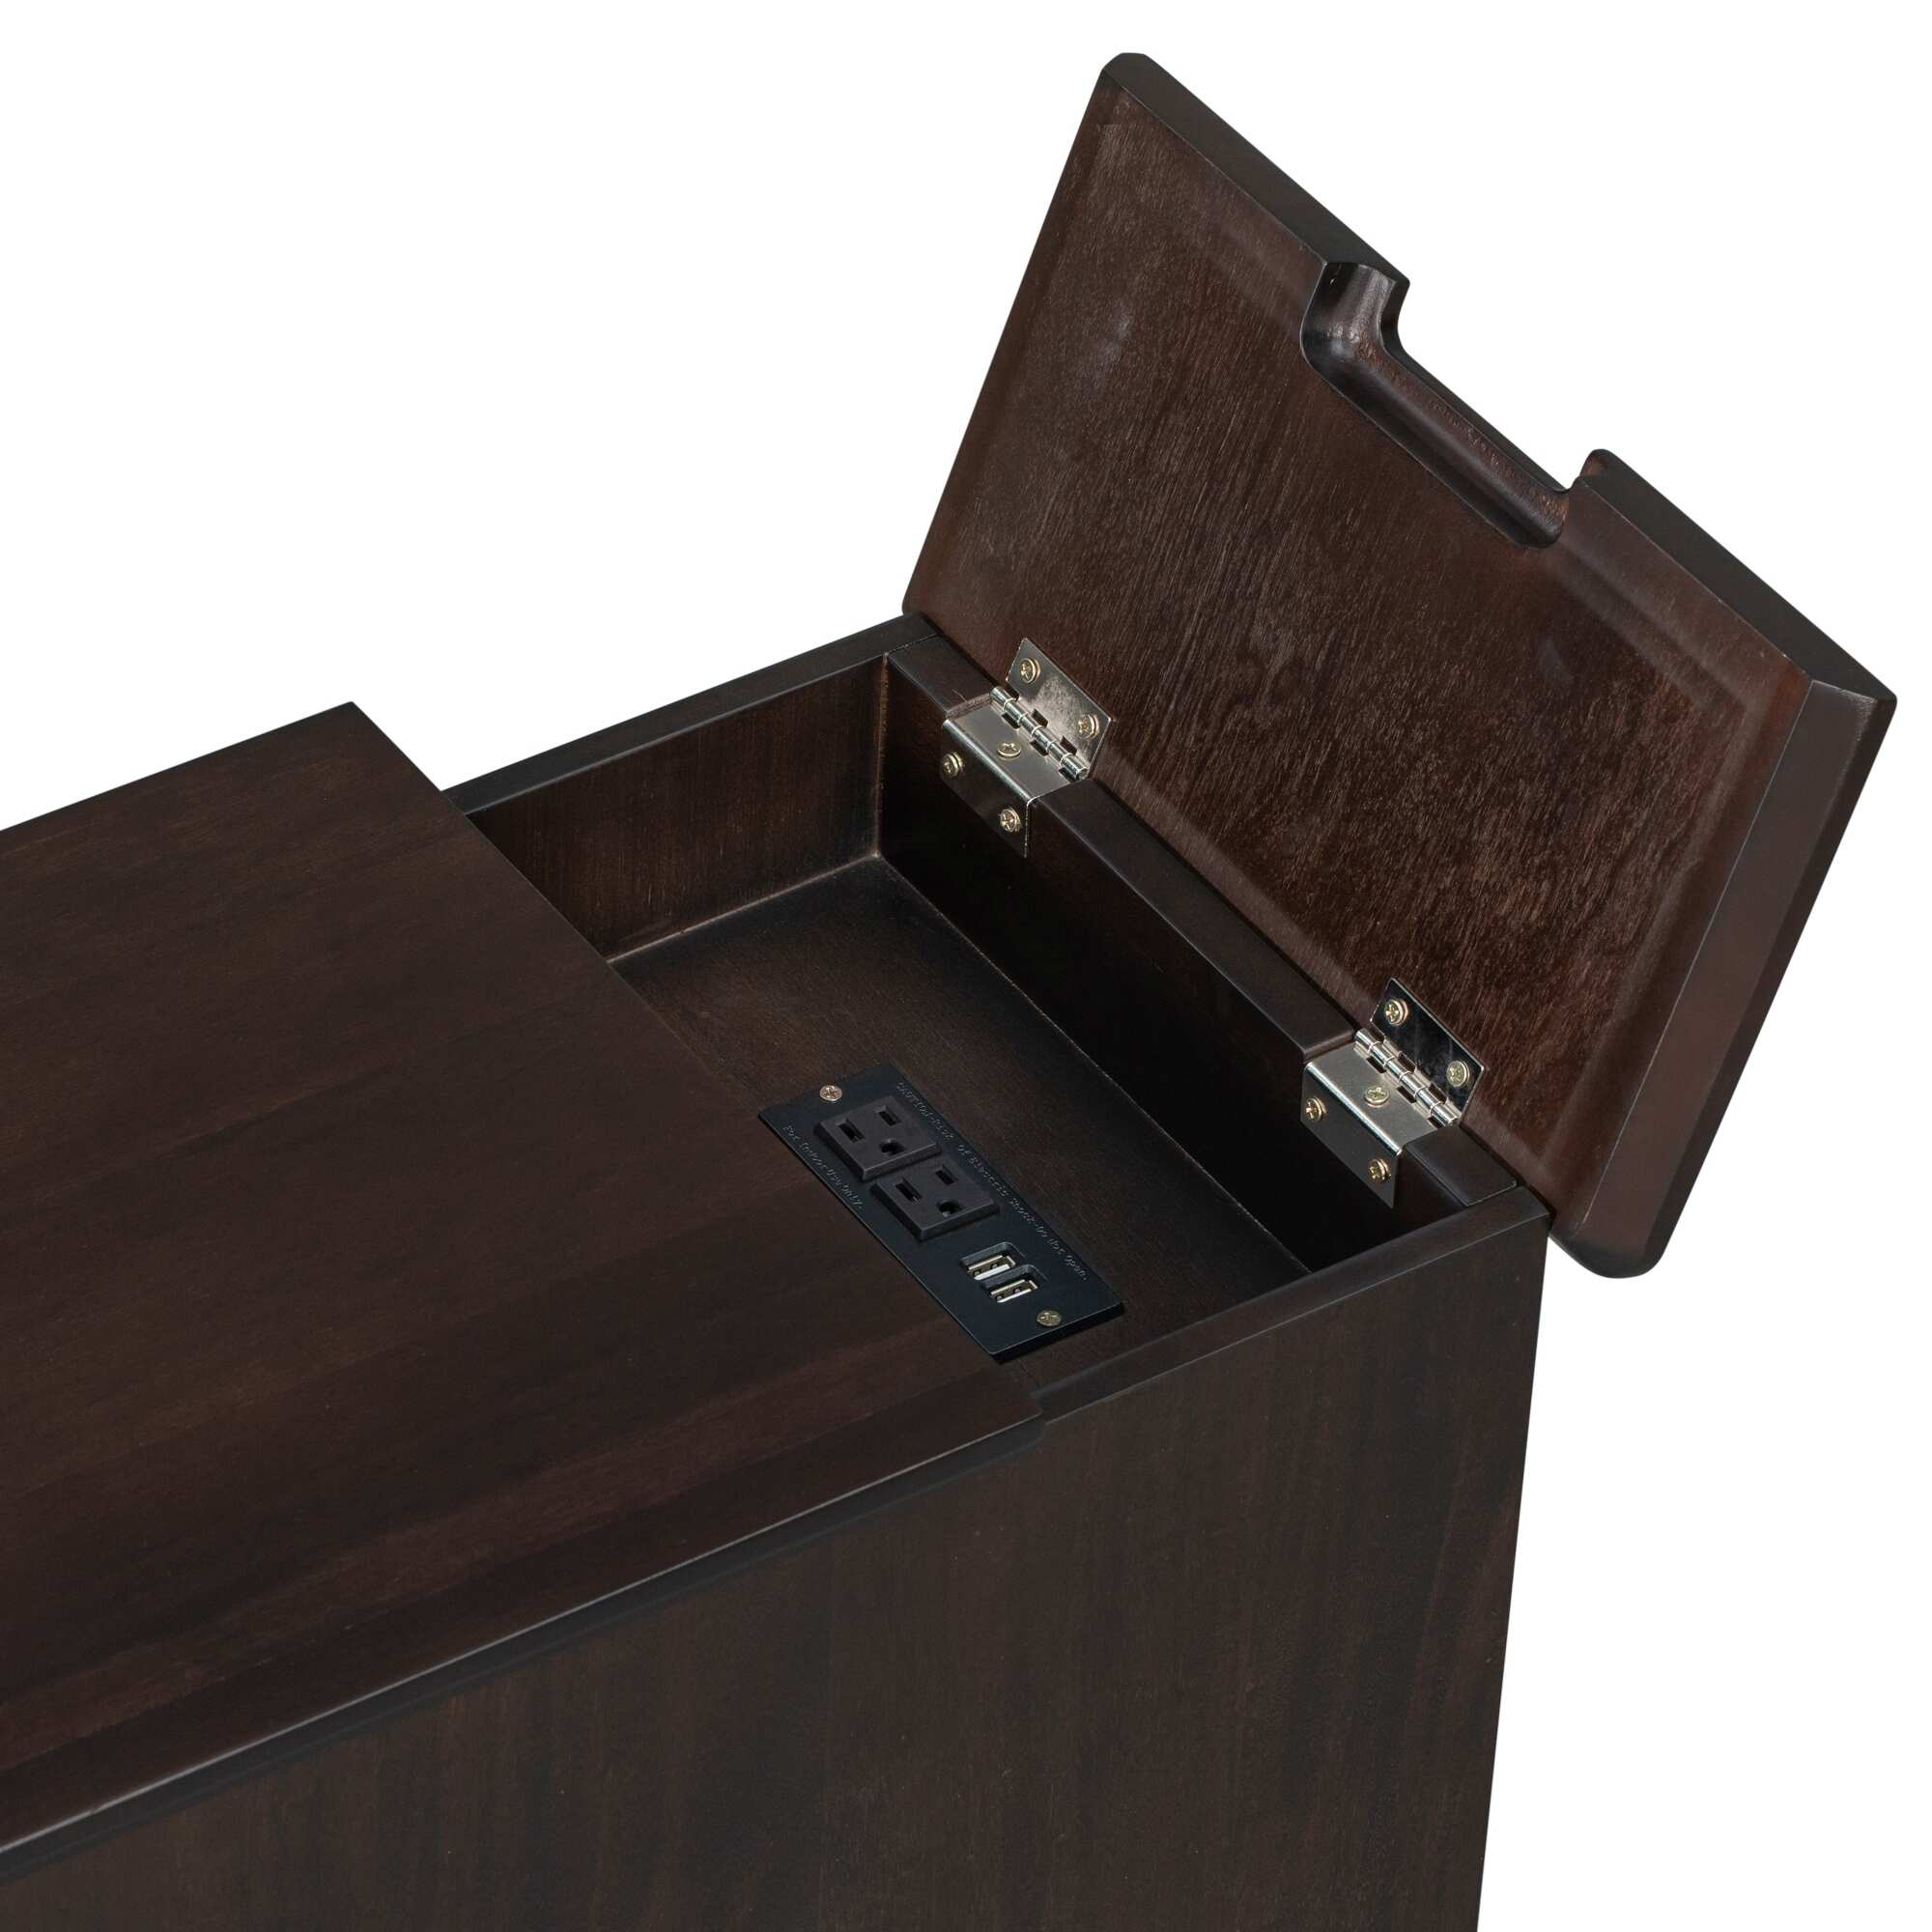 Side Table with USB Ports and 1 Multifunctional Drawer with cup holders - 23'' H x 14'' W x 24.3'' D - Antique Espresso